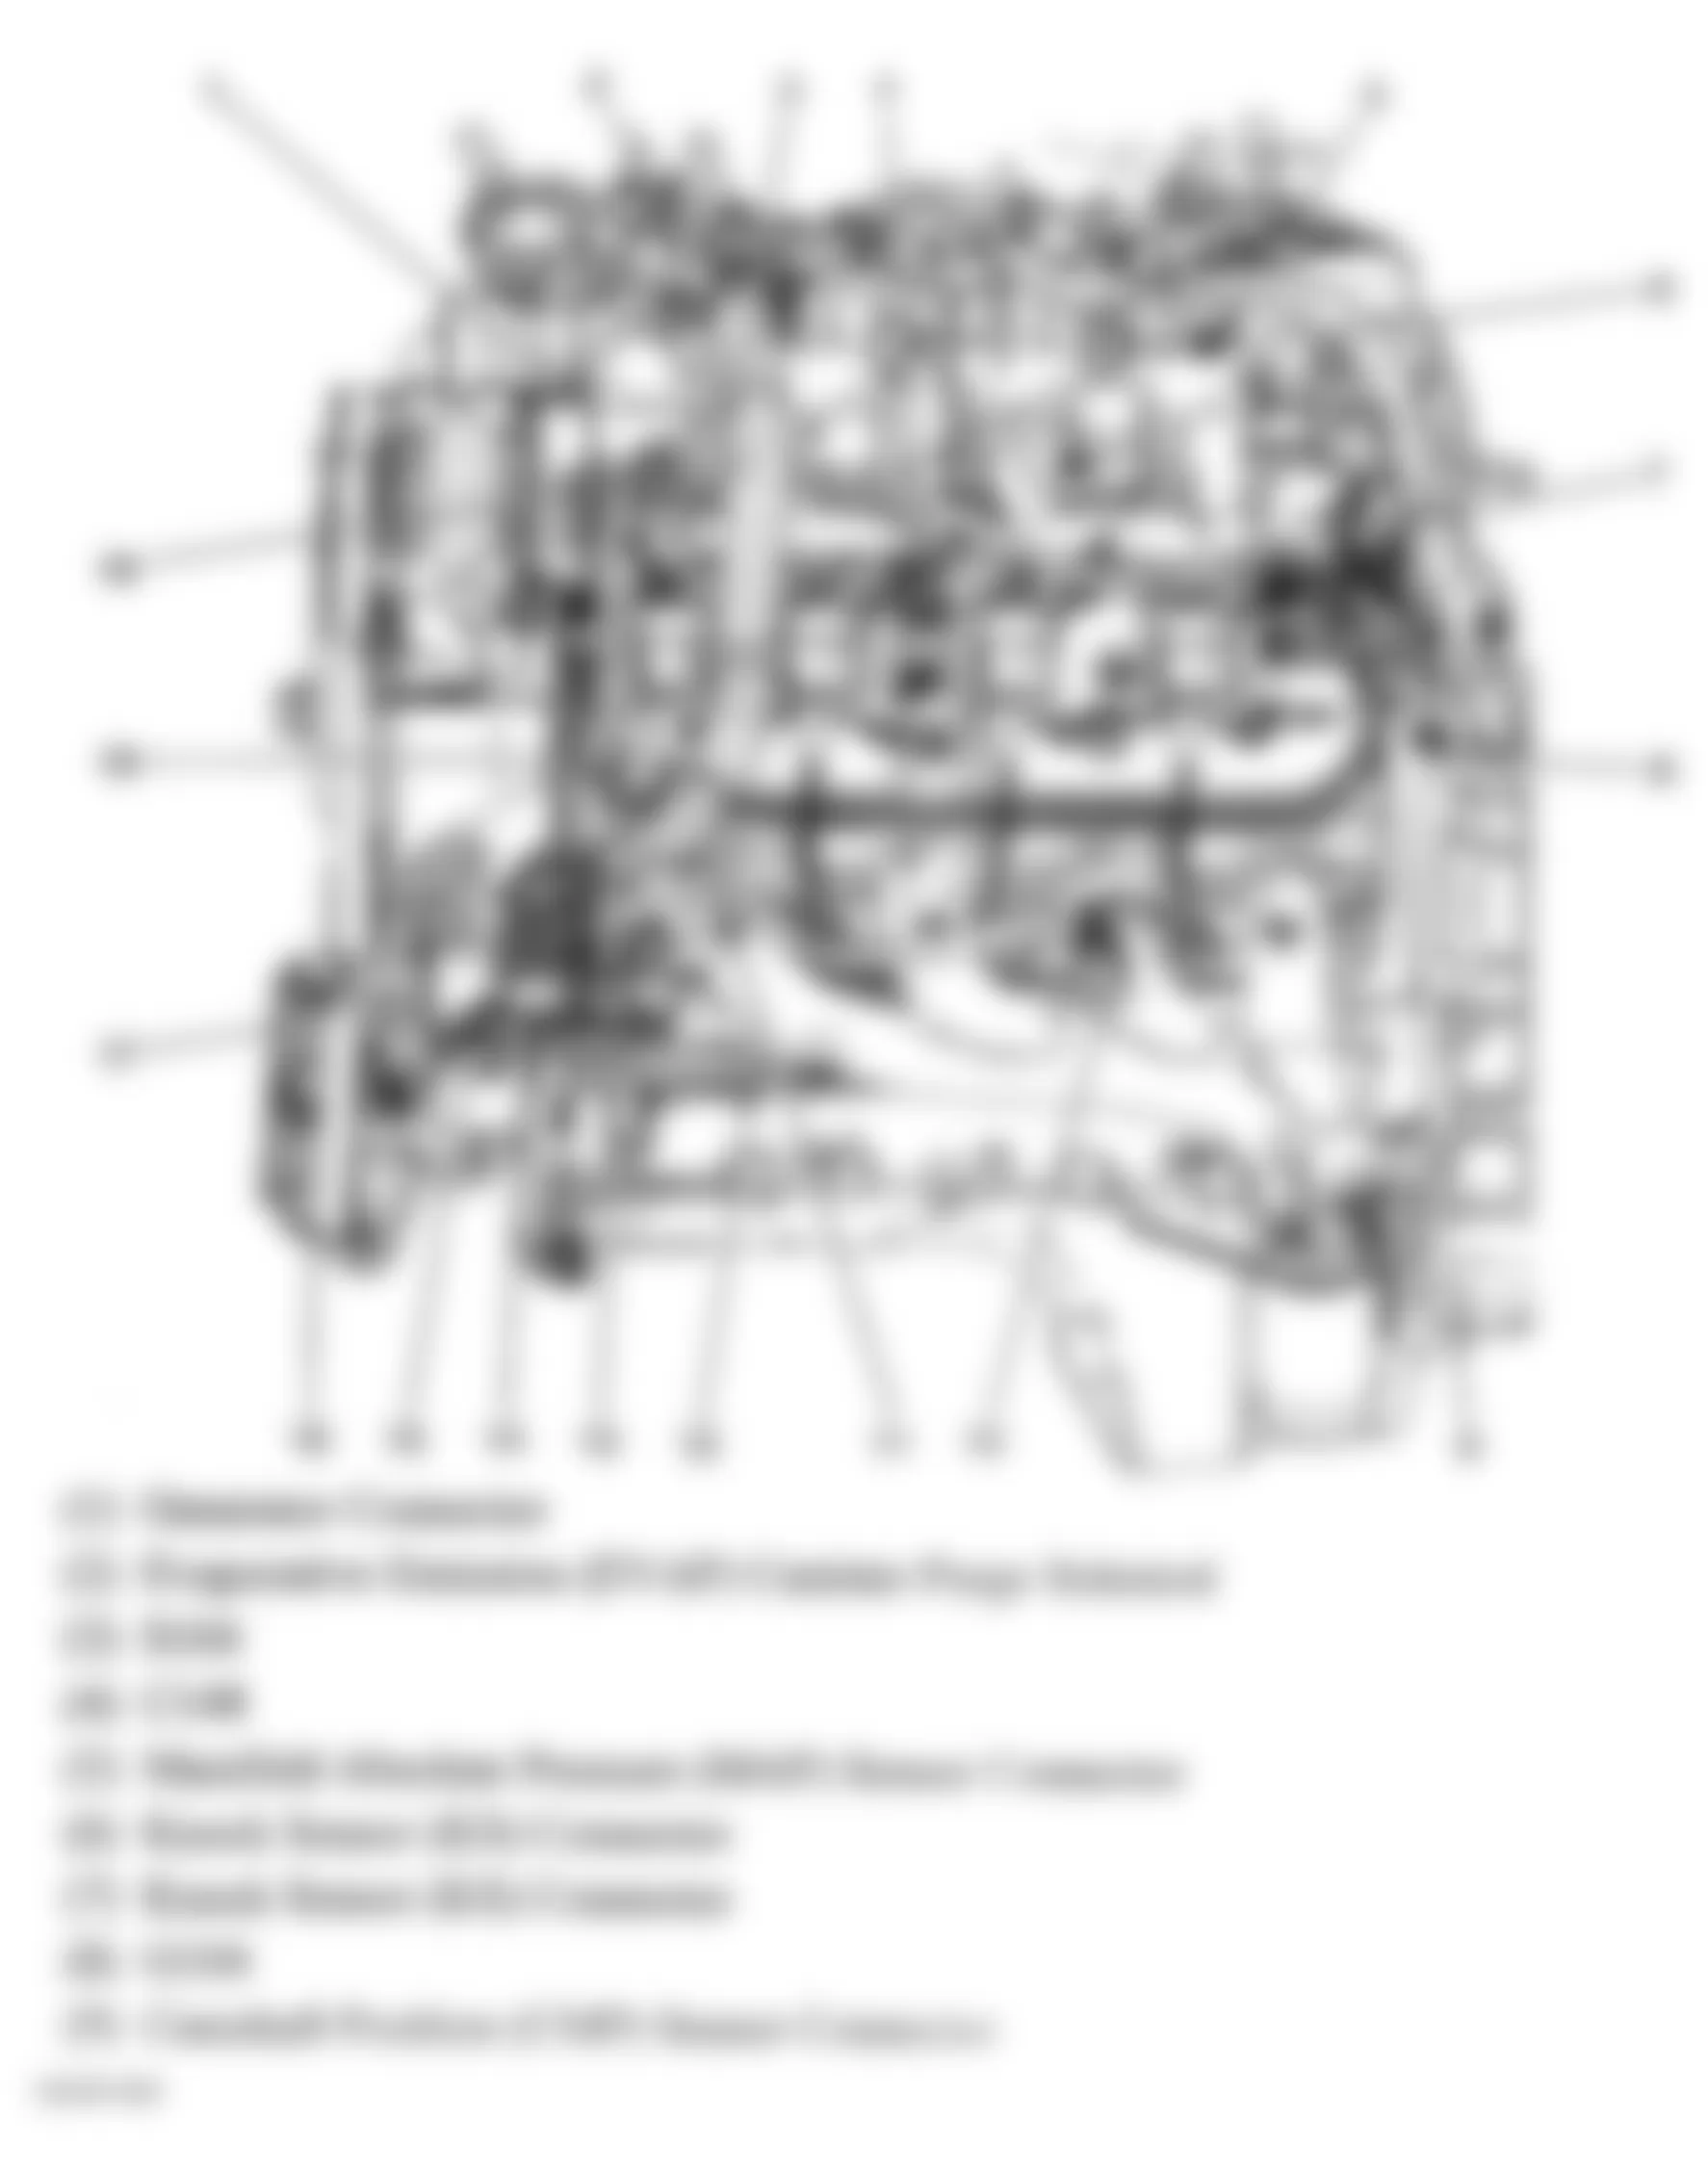 GMC Sierra 3500 2004 - Component Locations -  Left Side Of Engine (4.8L, 5.3L & 6.0L)